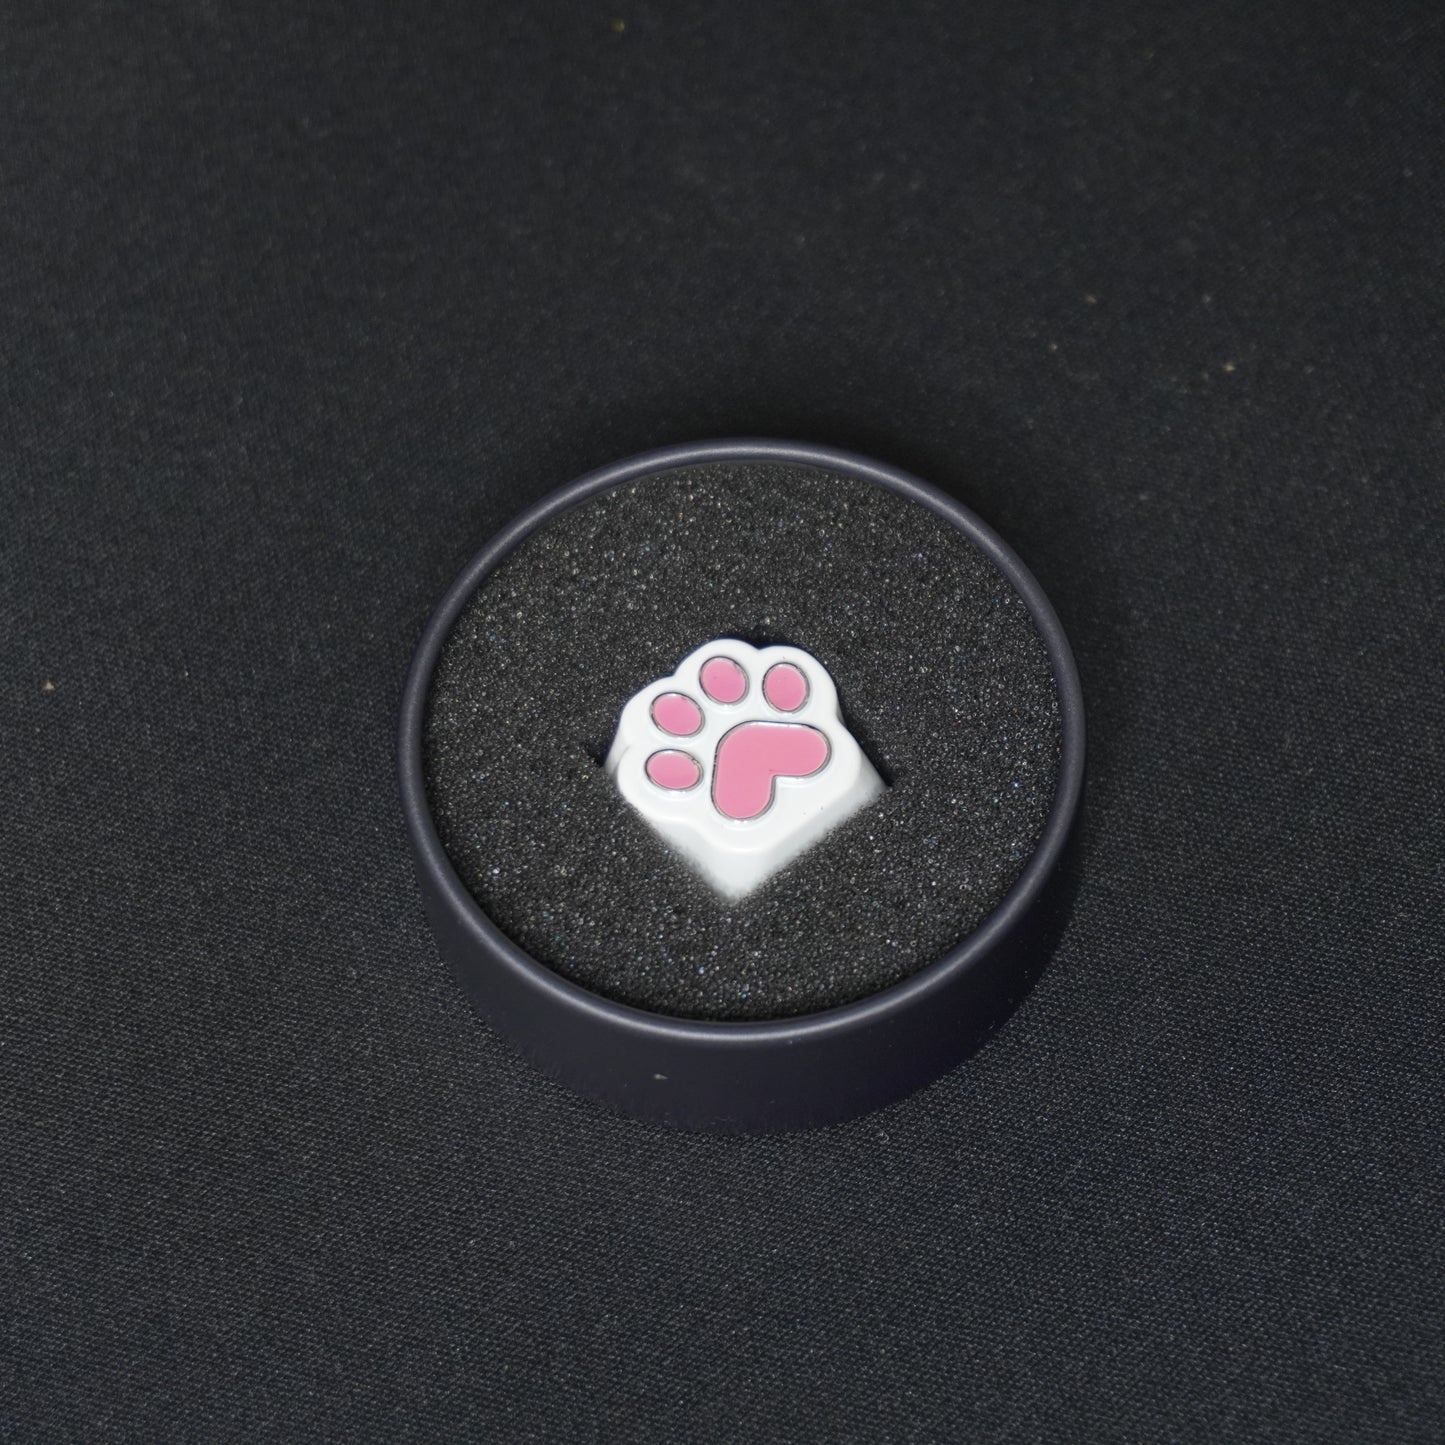 A detail photo of the Paw Print metal artisan anime keycap in its Packaging Tin